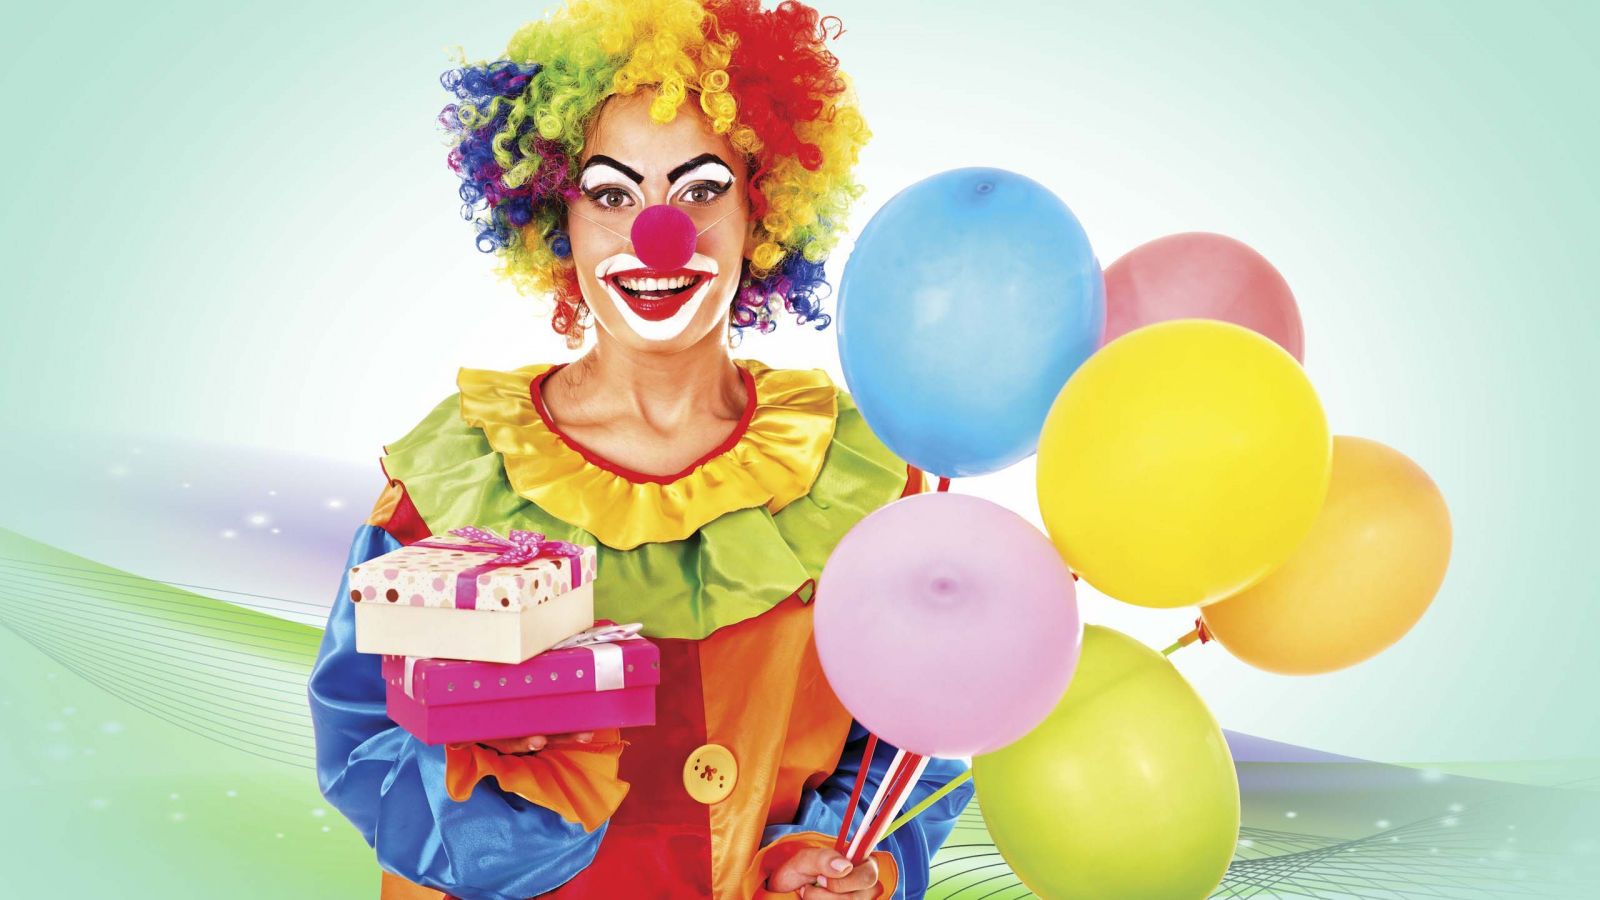 Funny Clown Balloons Gifts HD Wallpaper Wallpaper. All is Wall